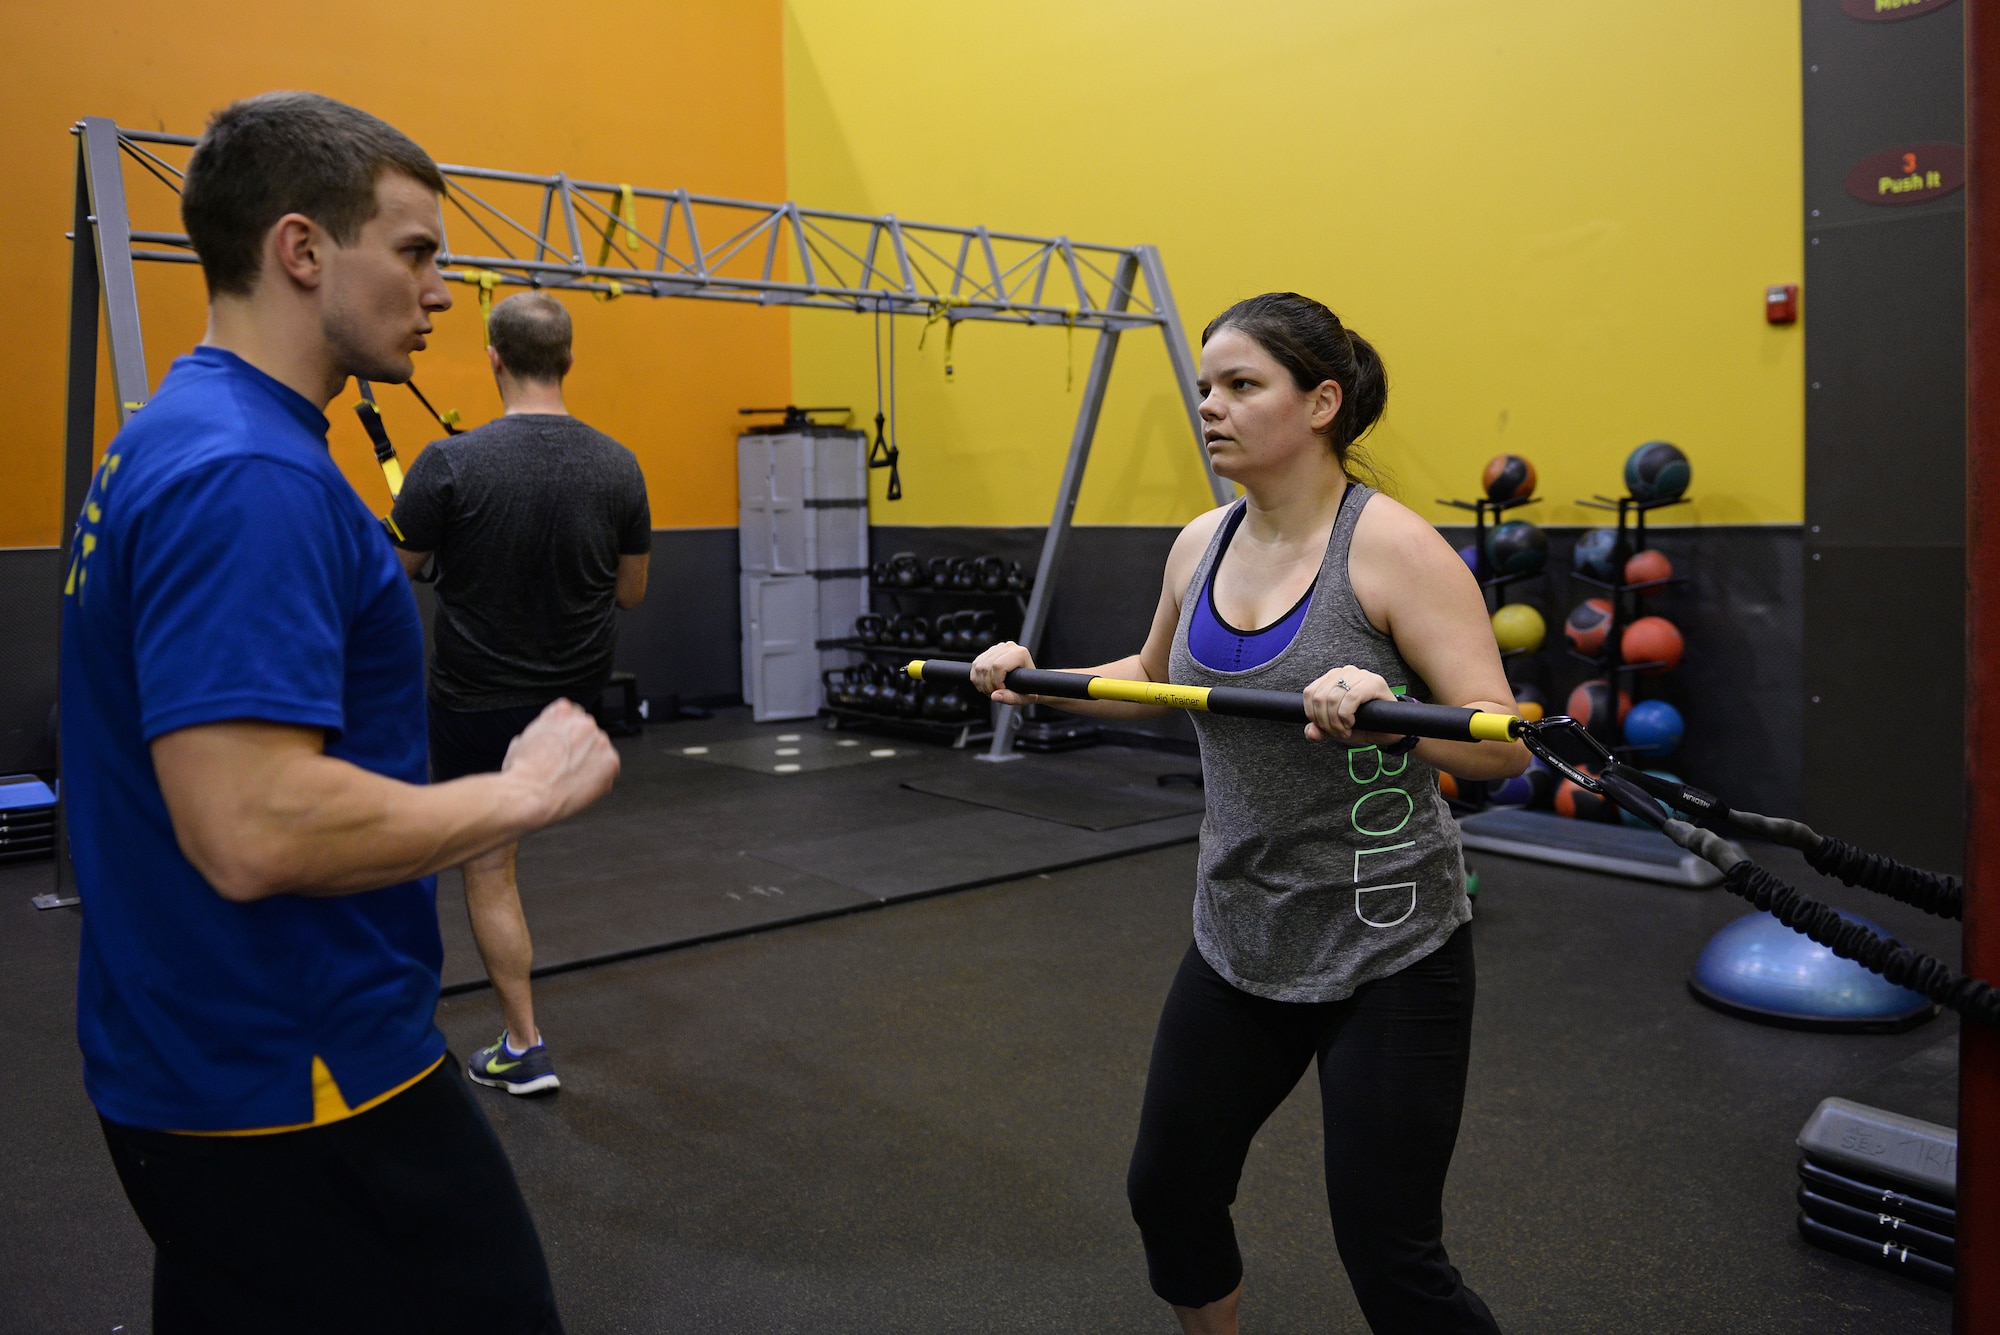 Jessi McNulty, 26, performs a tension exercise, while Nate Myers, her personal trainer instructs her on proper form at her gym, O’Fallon, Ill., Jan. 22, 2015. This Air Force spouse has been hitting this gym for nearly two years, during which time she has lost 90 pounds despite having temporal lobe epilepsy. Generally her workouts are total-body-oriented and her and her personal trainer monitors her heart rate to mitigate her seizures, which are exercise-induced. (U.S. Air Force photo by Airman 1st Class Erica Crossen)